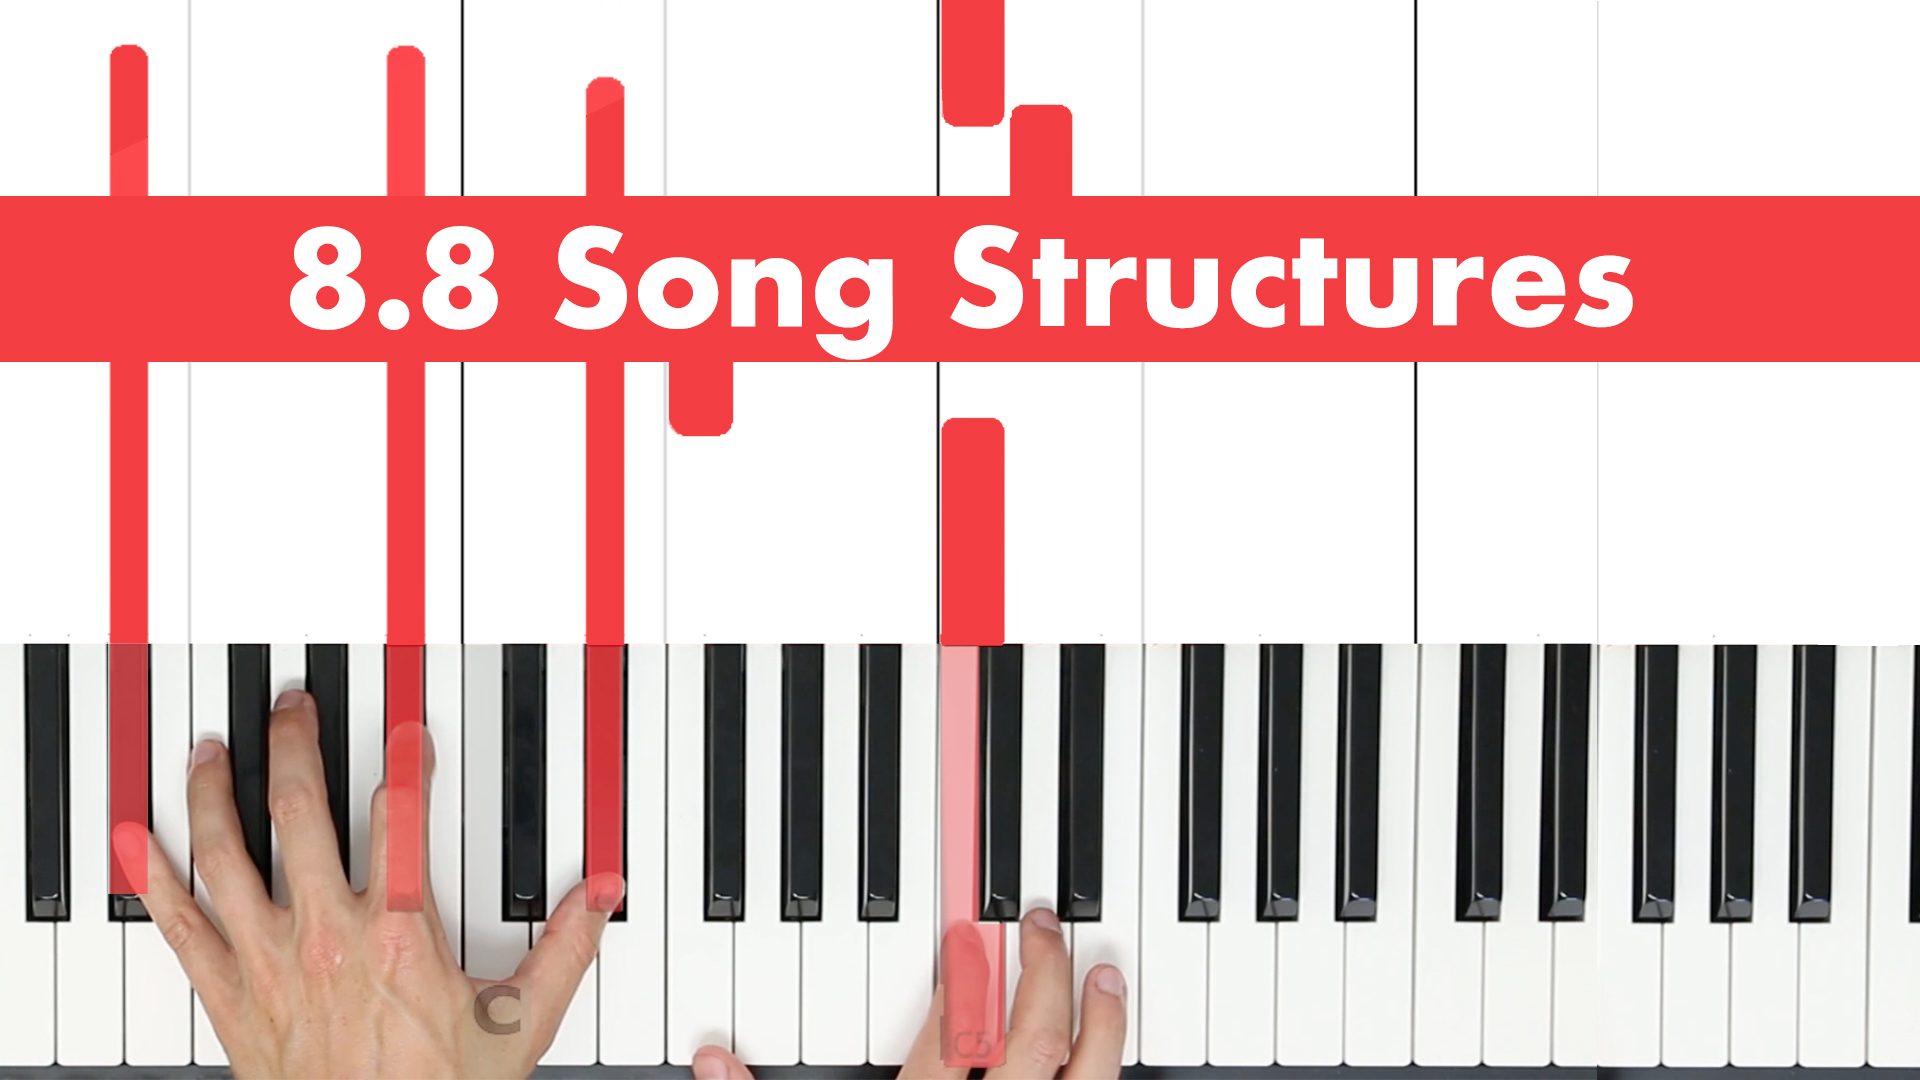 8.8 Song Structures